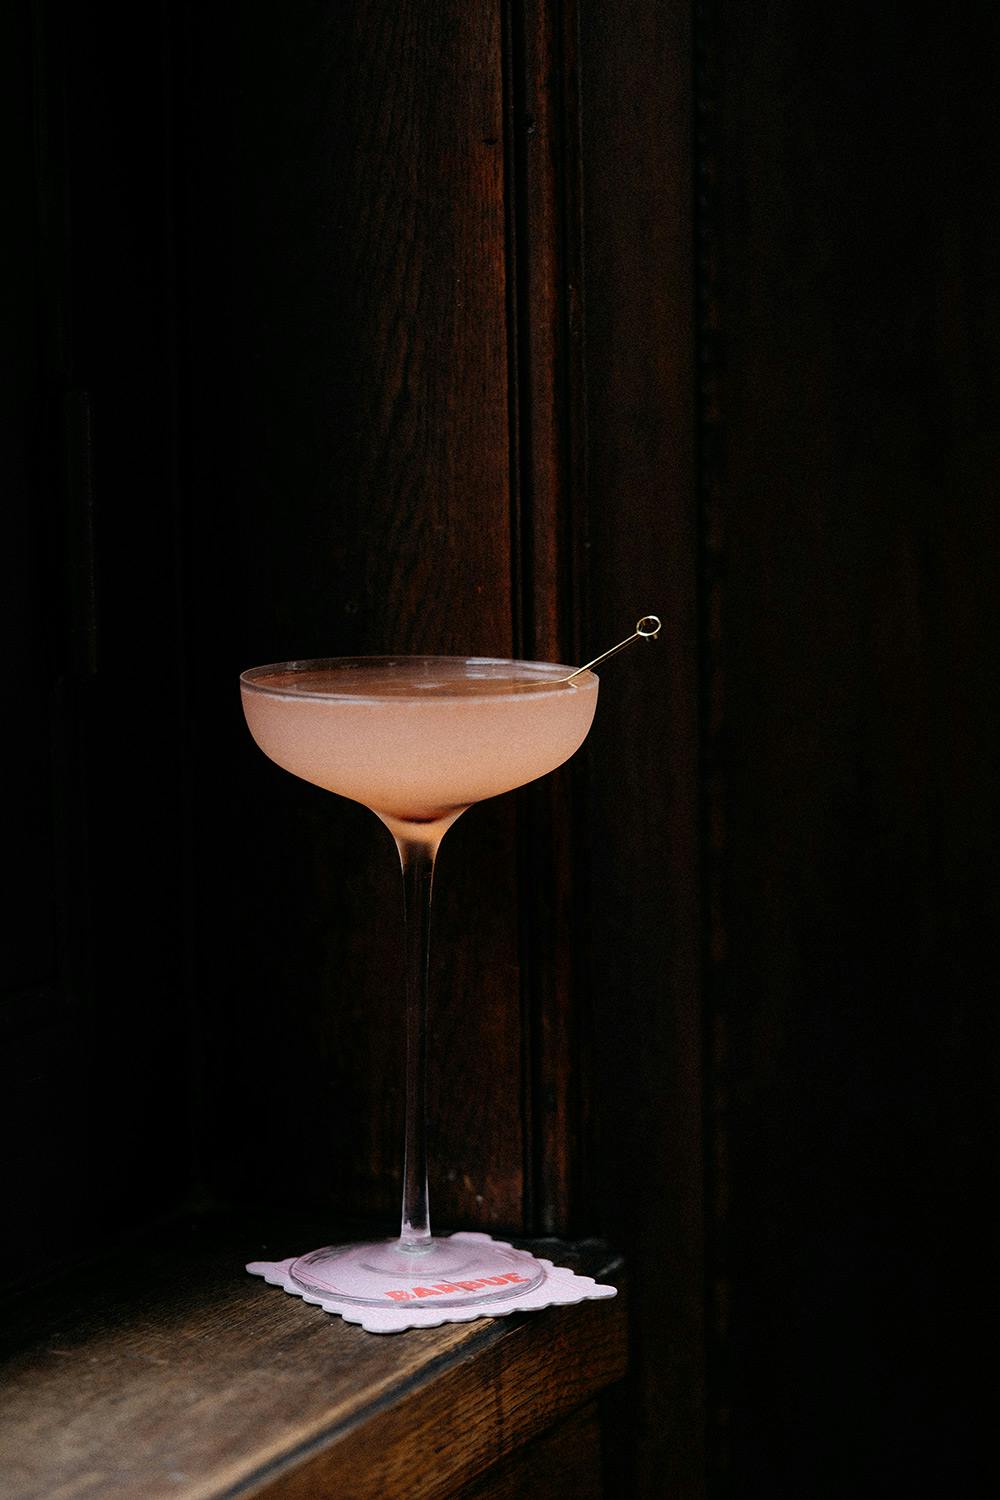 Pale cocktail in moody lighting